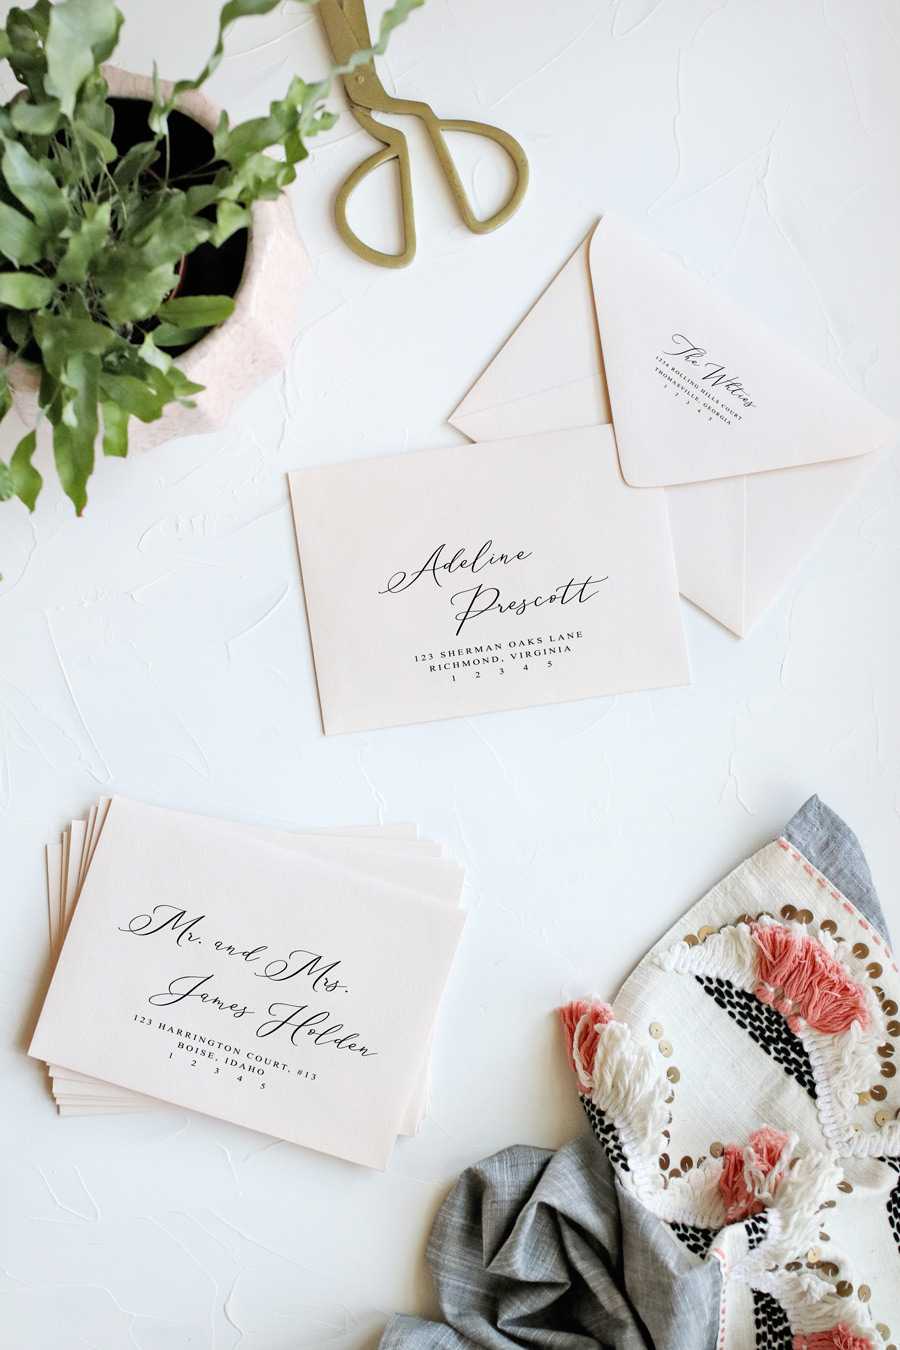 How To Print Envelopes The Easy Way | Pipkin Paper Company In Paper Source Templates Place Cards